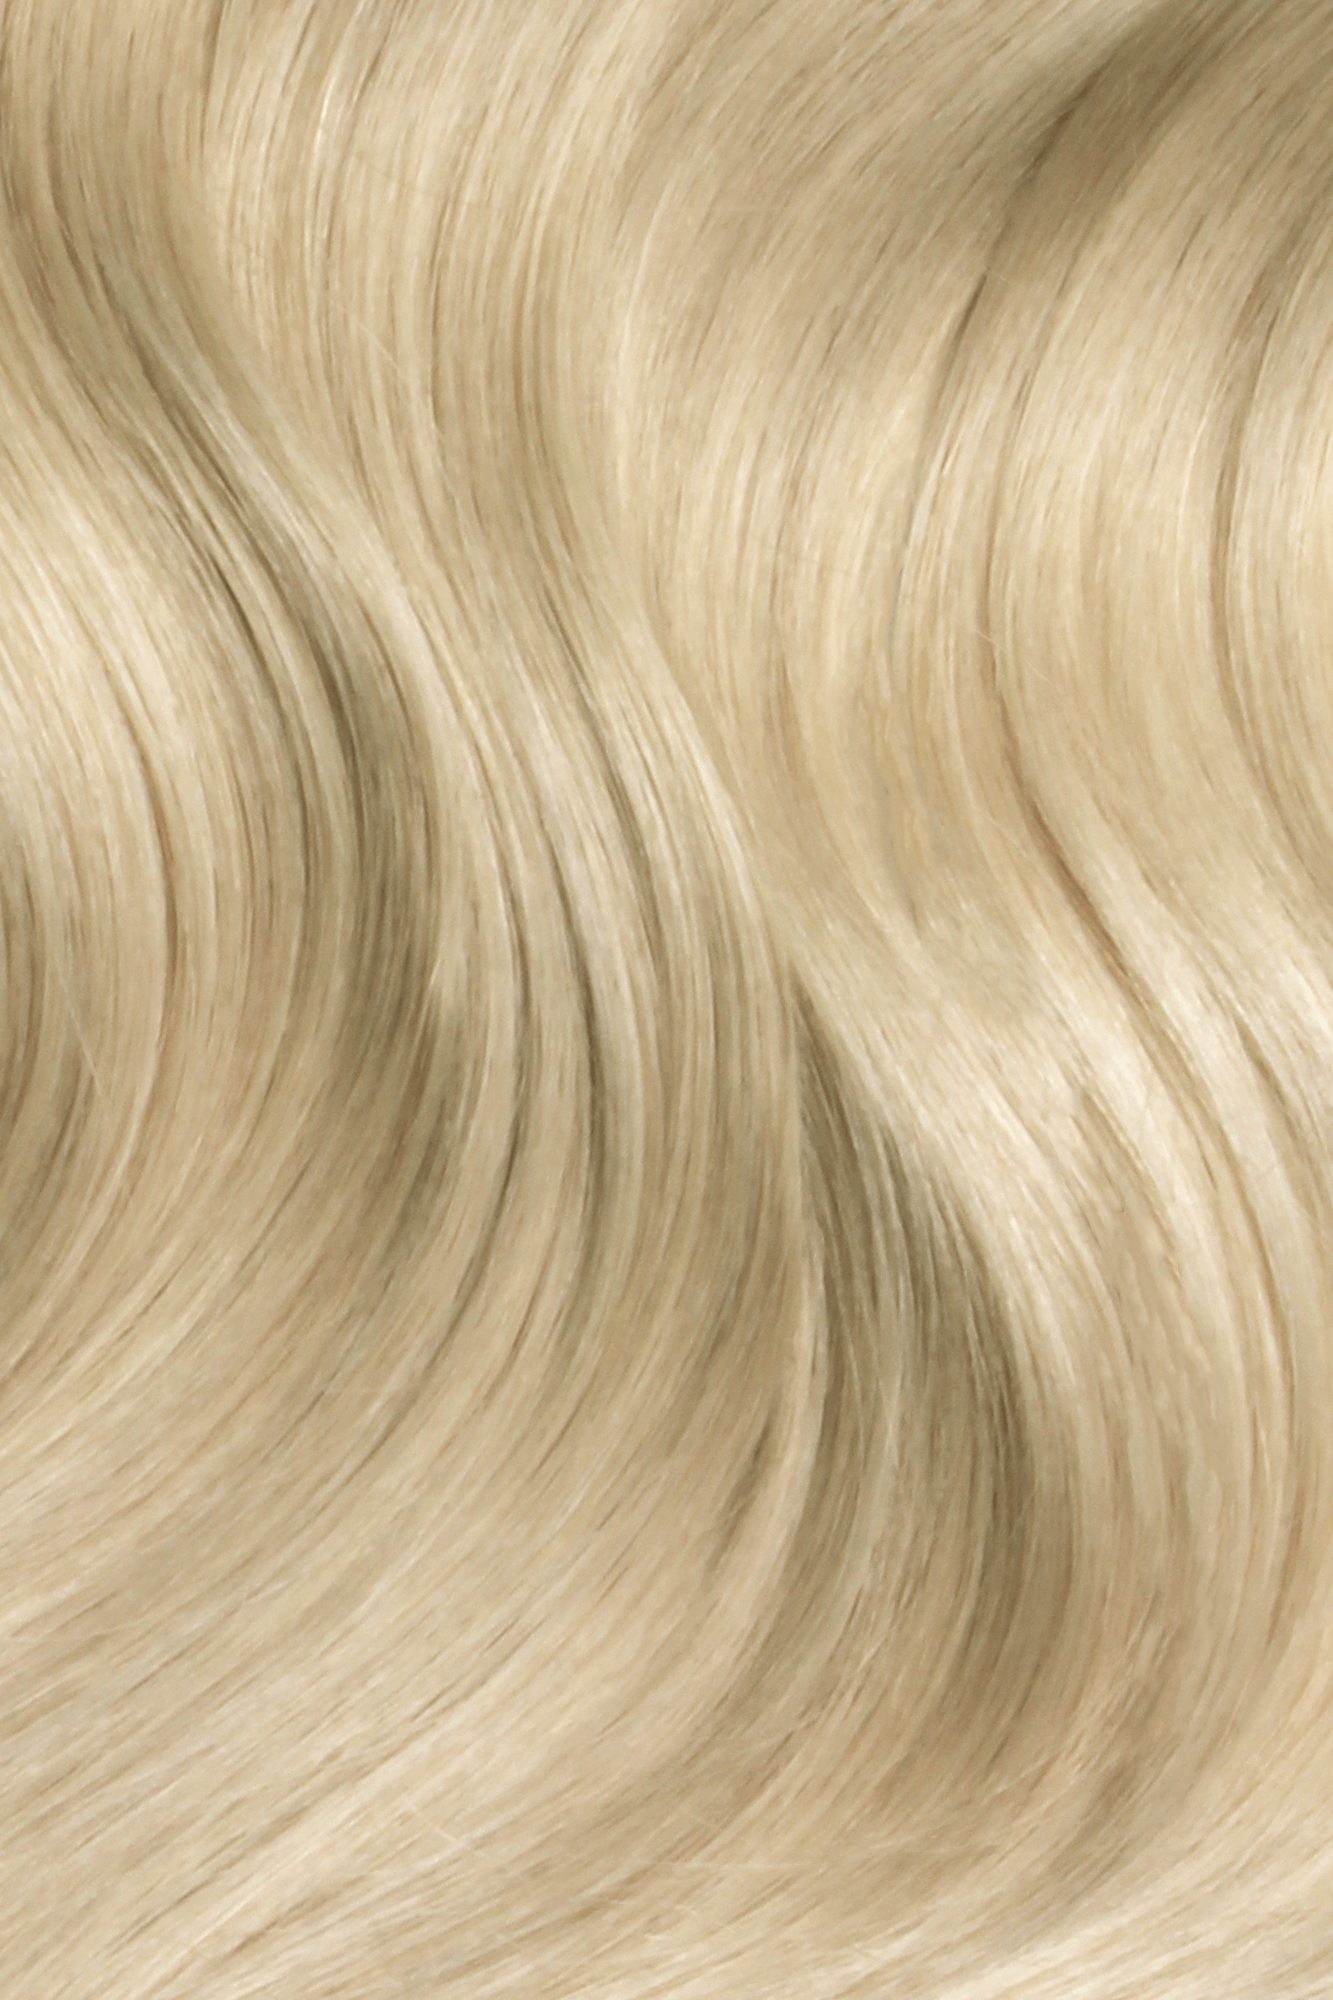 SEAMLESS® Tapes 22 Inches - SWAY Hair Extensions Hollywood-Ash-Blonde-18A-613A SWAY SEAMLESS® Tapes 22 Inches - Natural, lightweight hair extensions for longer, fuller, and luxurious hair. Virtually undetectable, reusable, and perfect for any hairstyle